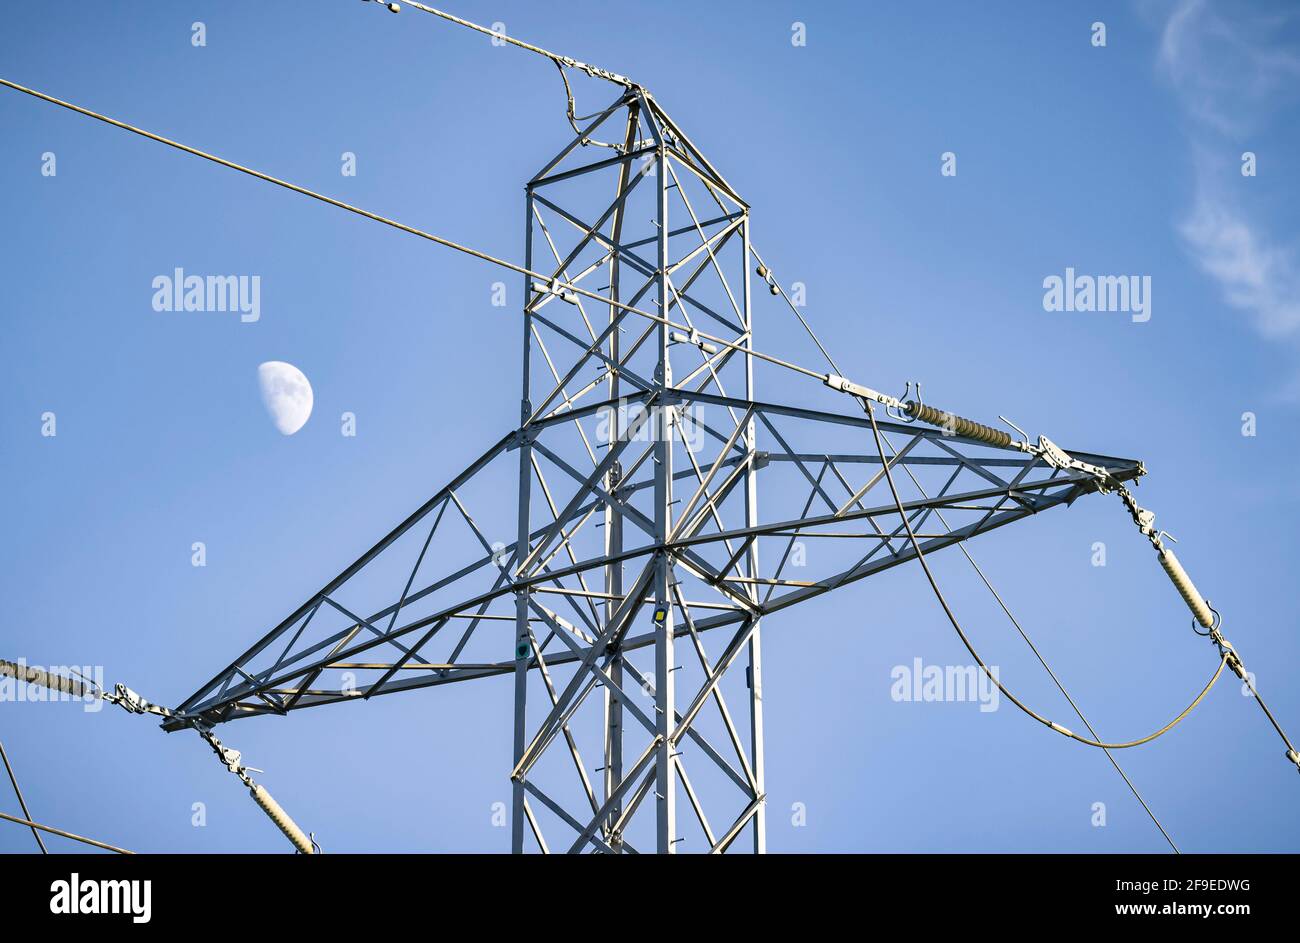 Detail of electricity pylon with the moon against a blue sky, depicting UK National Grid and electricity power supply Stock Photo